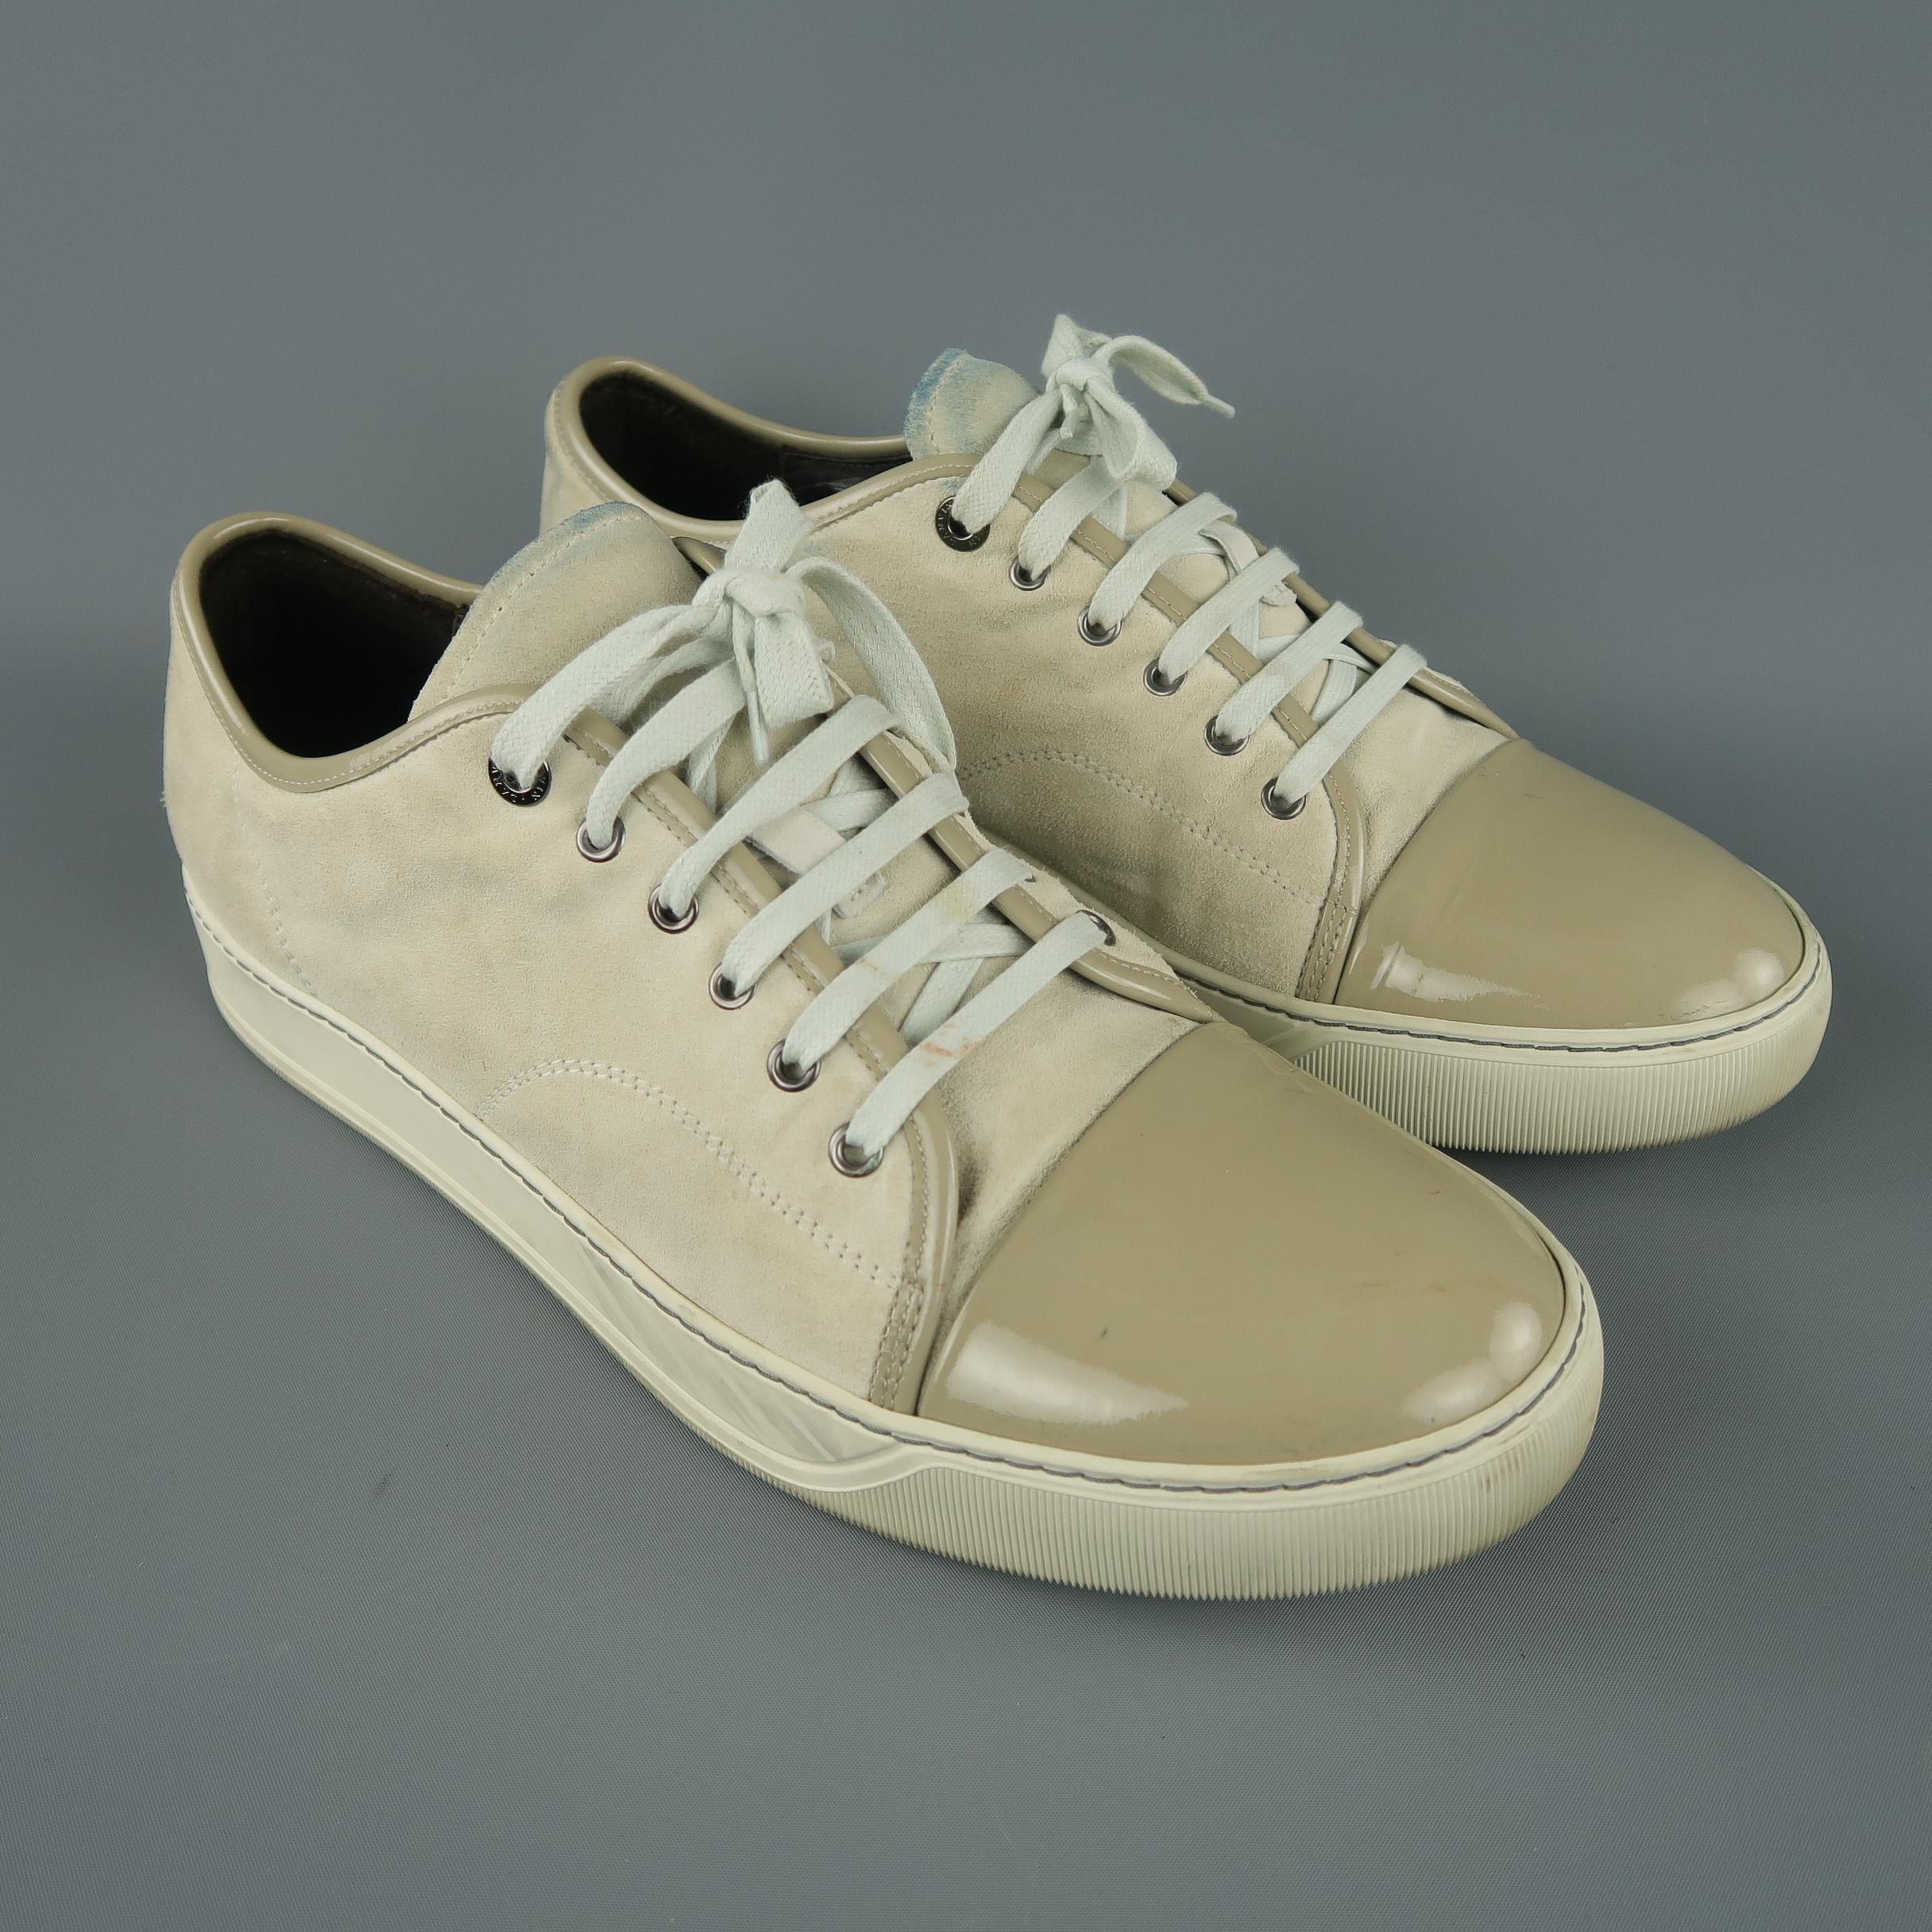 LANVIN soft ivory suede low-top sneakers are styled with a patent leather cap toe. As-Is. Made in Portugal.
 
Very good Pre-Owned Condition.
Marked: Lanvin UK 12
 
Outsole: 13 x 3 in